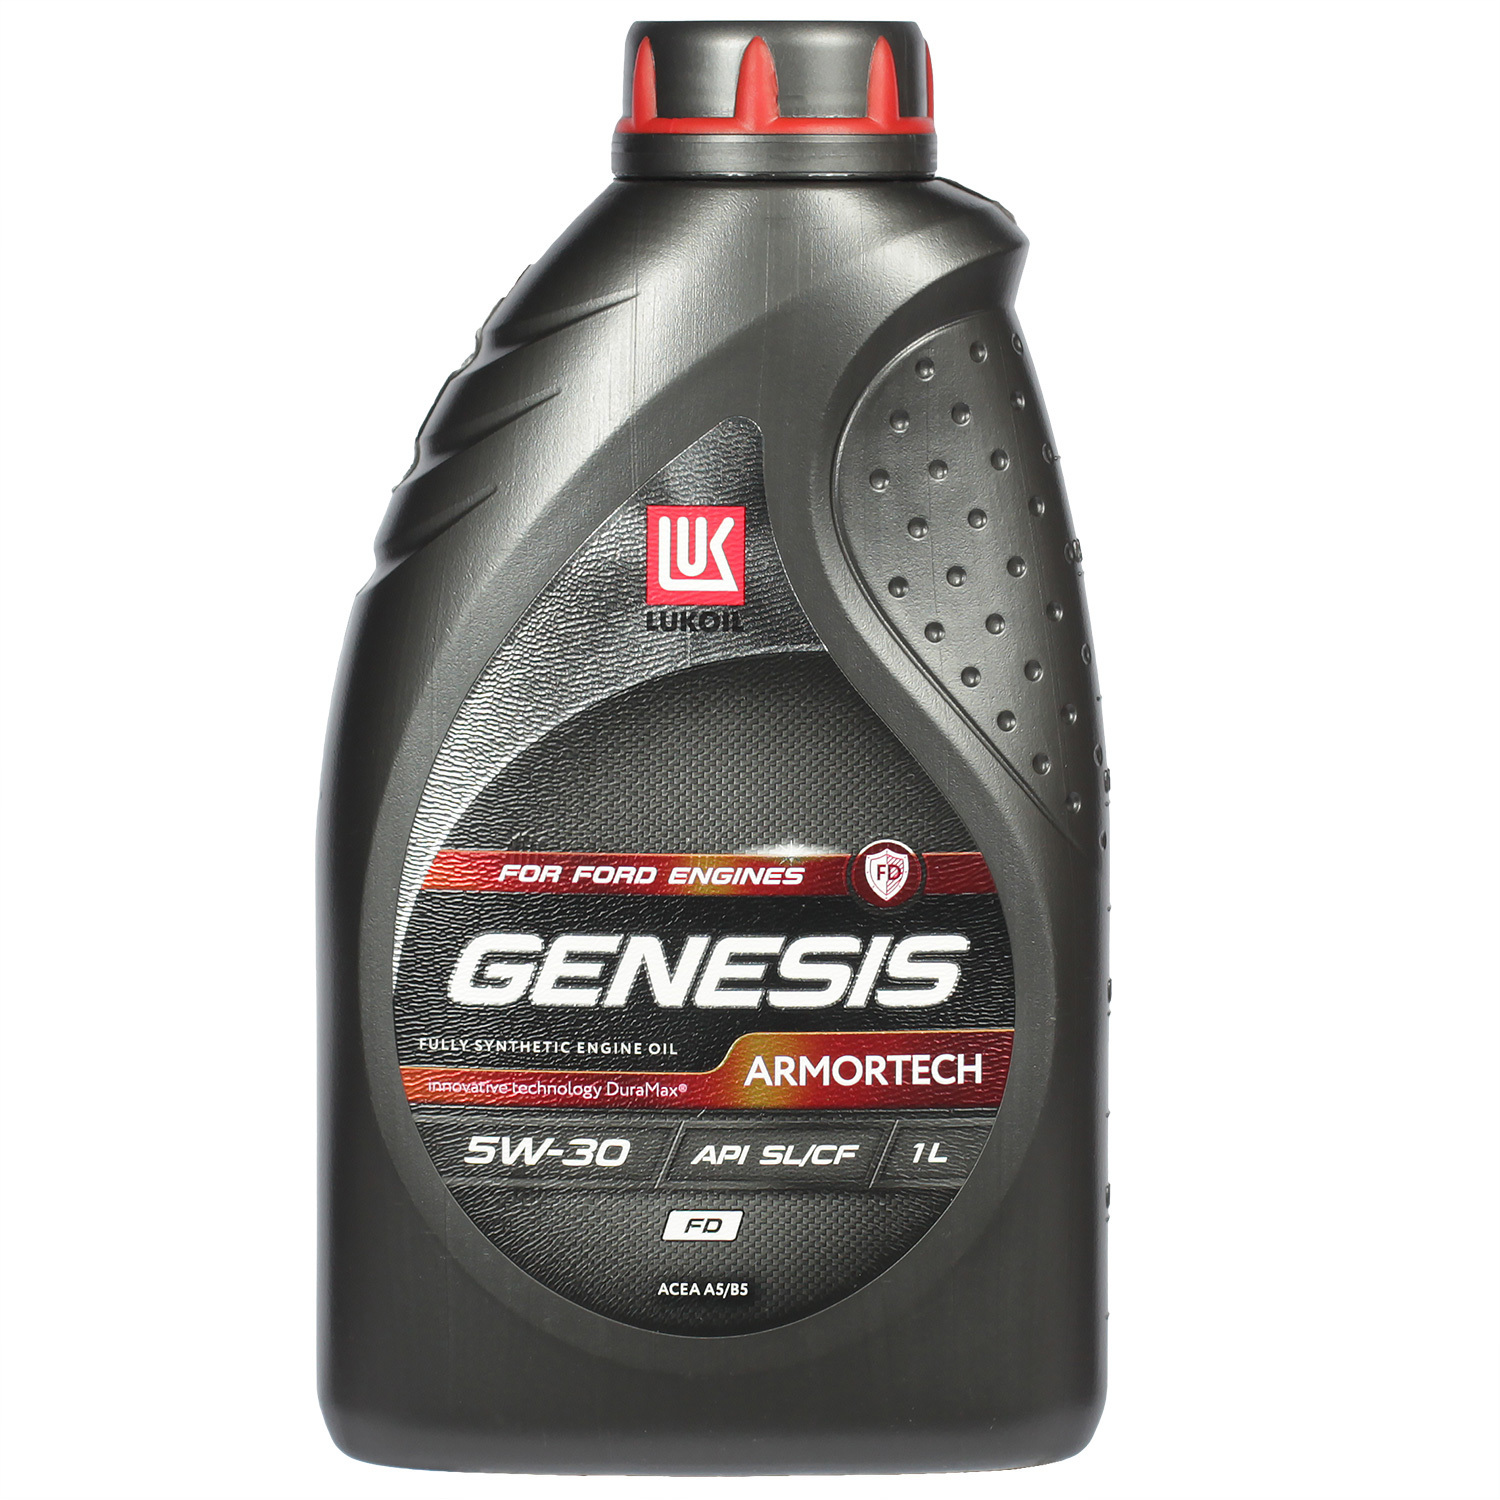 Lukoil Моторное масло Lukoil Genesis Armortech FD 5W-30, 1 л lukoil моторное масло lukoil genesis armortech diesel 5w 30 56 л